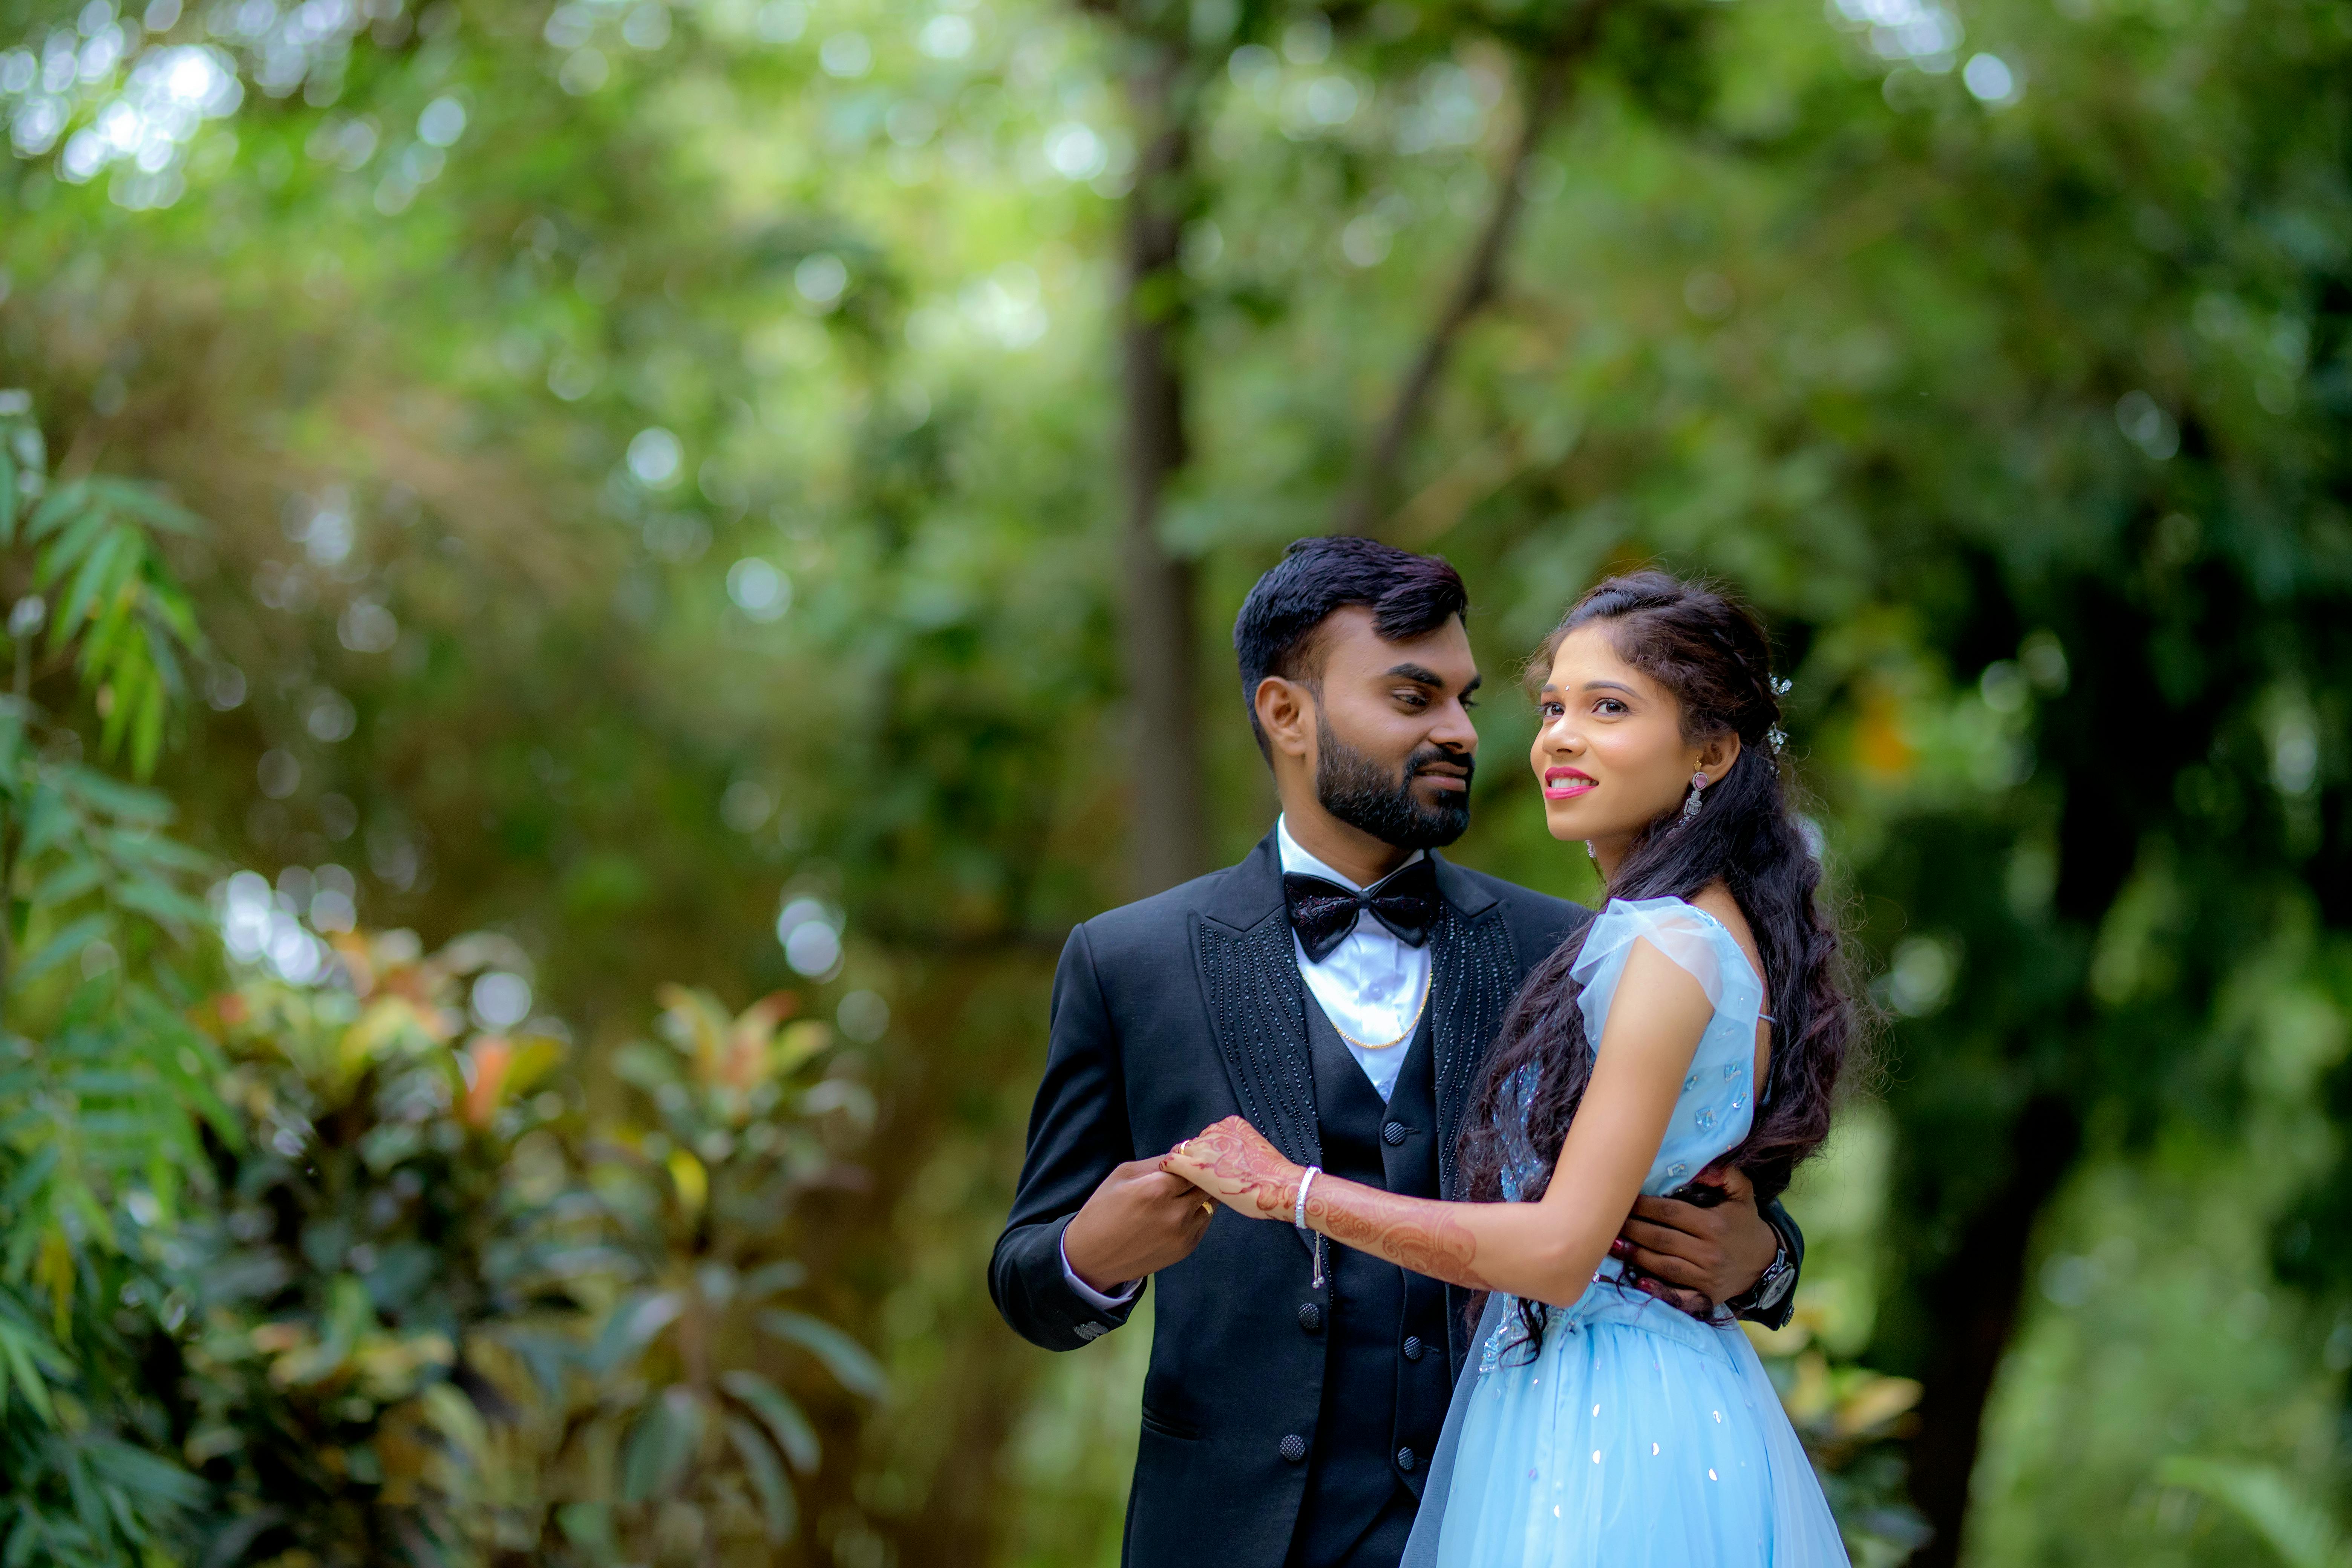 From Ethnic to Chic: Indian Engagement Photoshoot Poses You'll Love